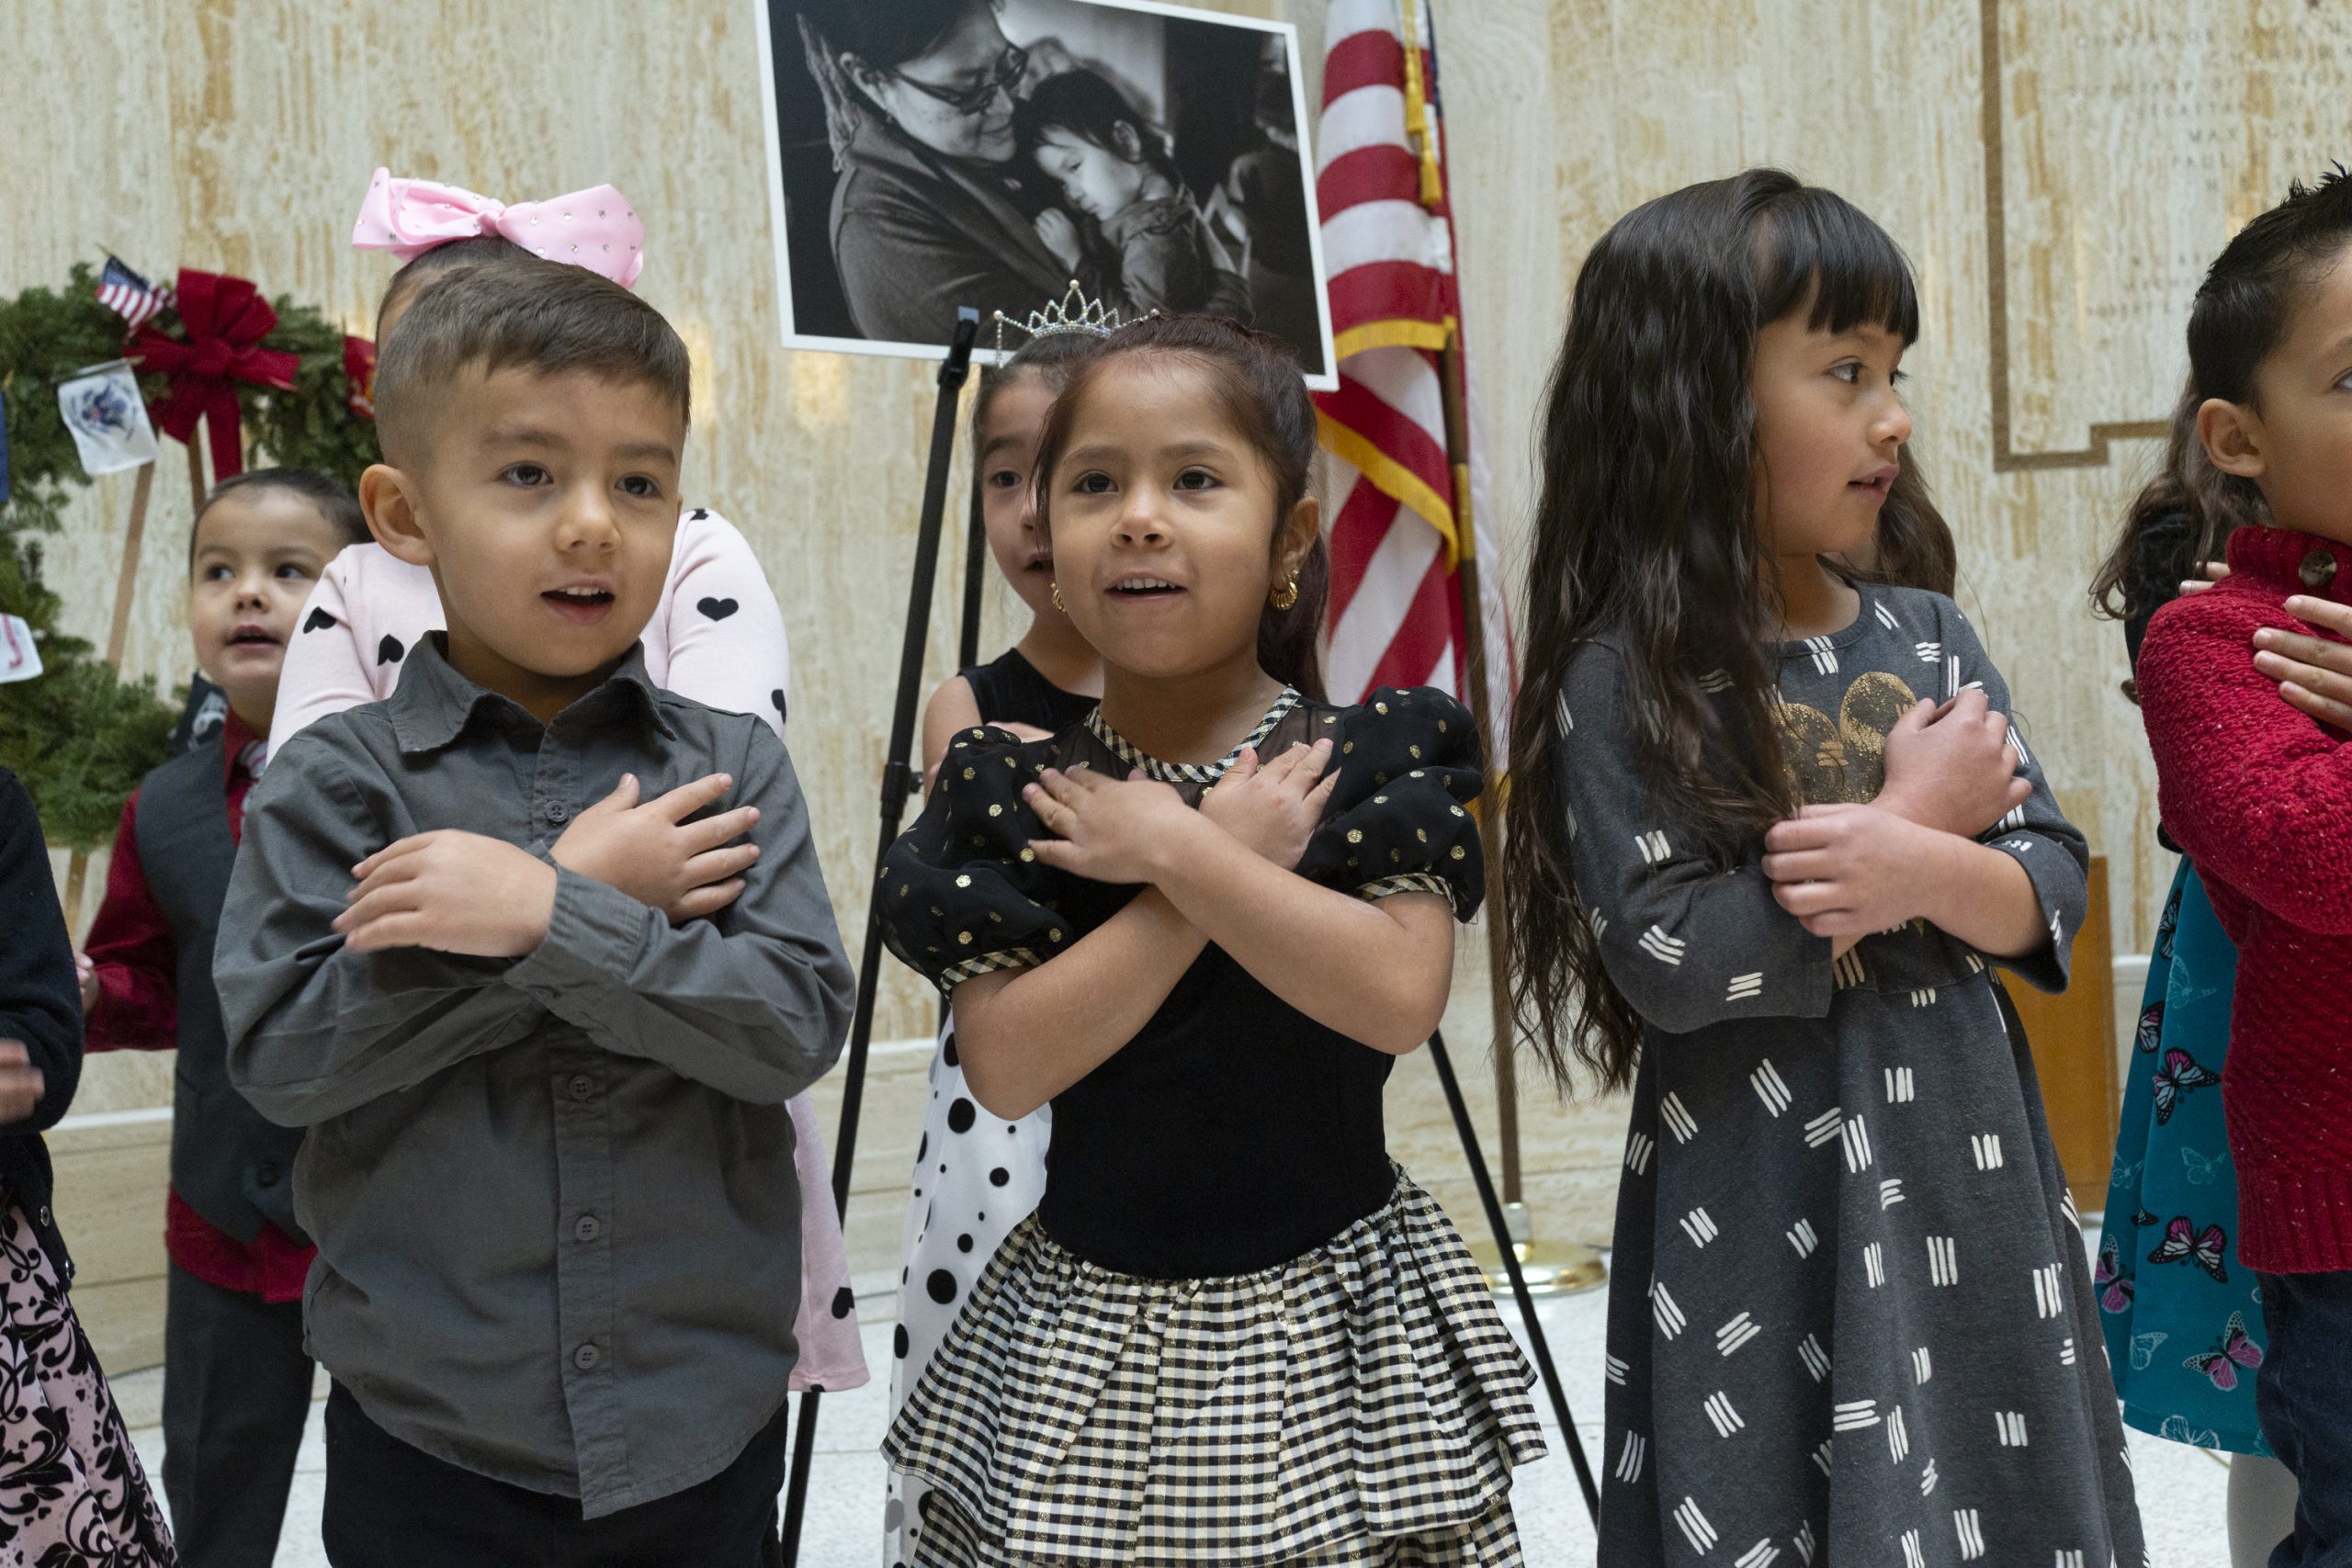 Needs improvement: Legislative session ends with mixed results for NM kids